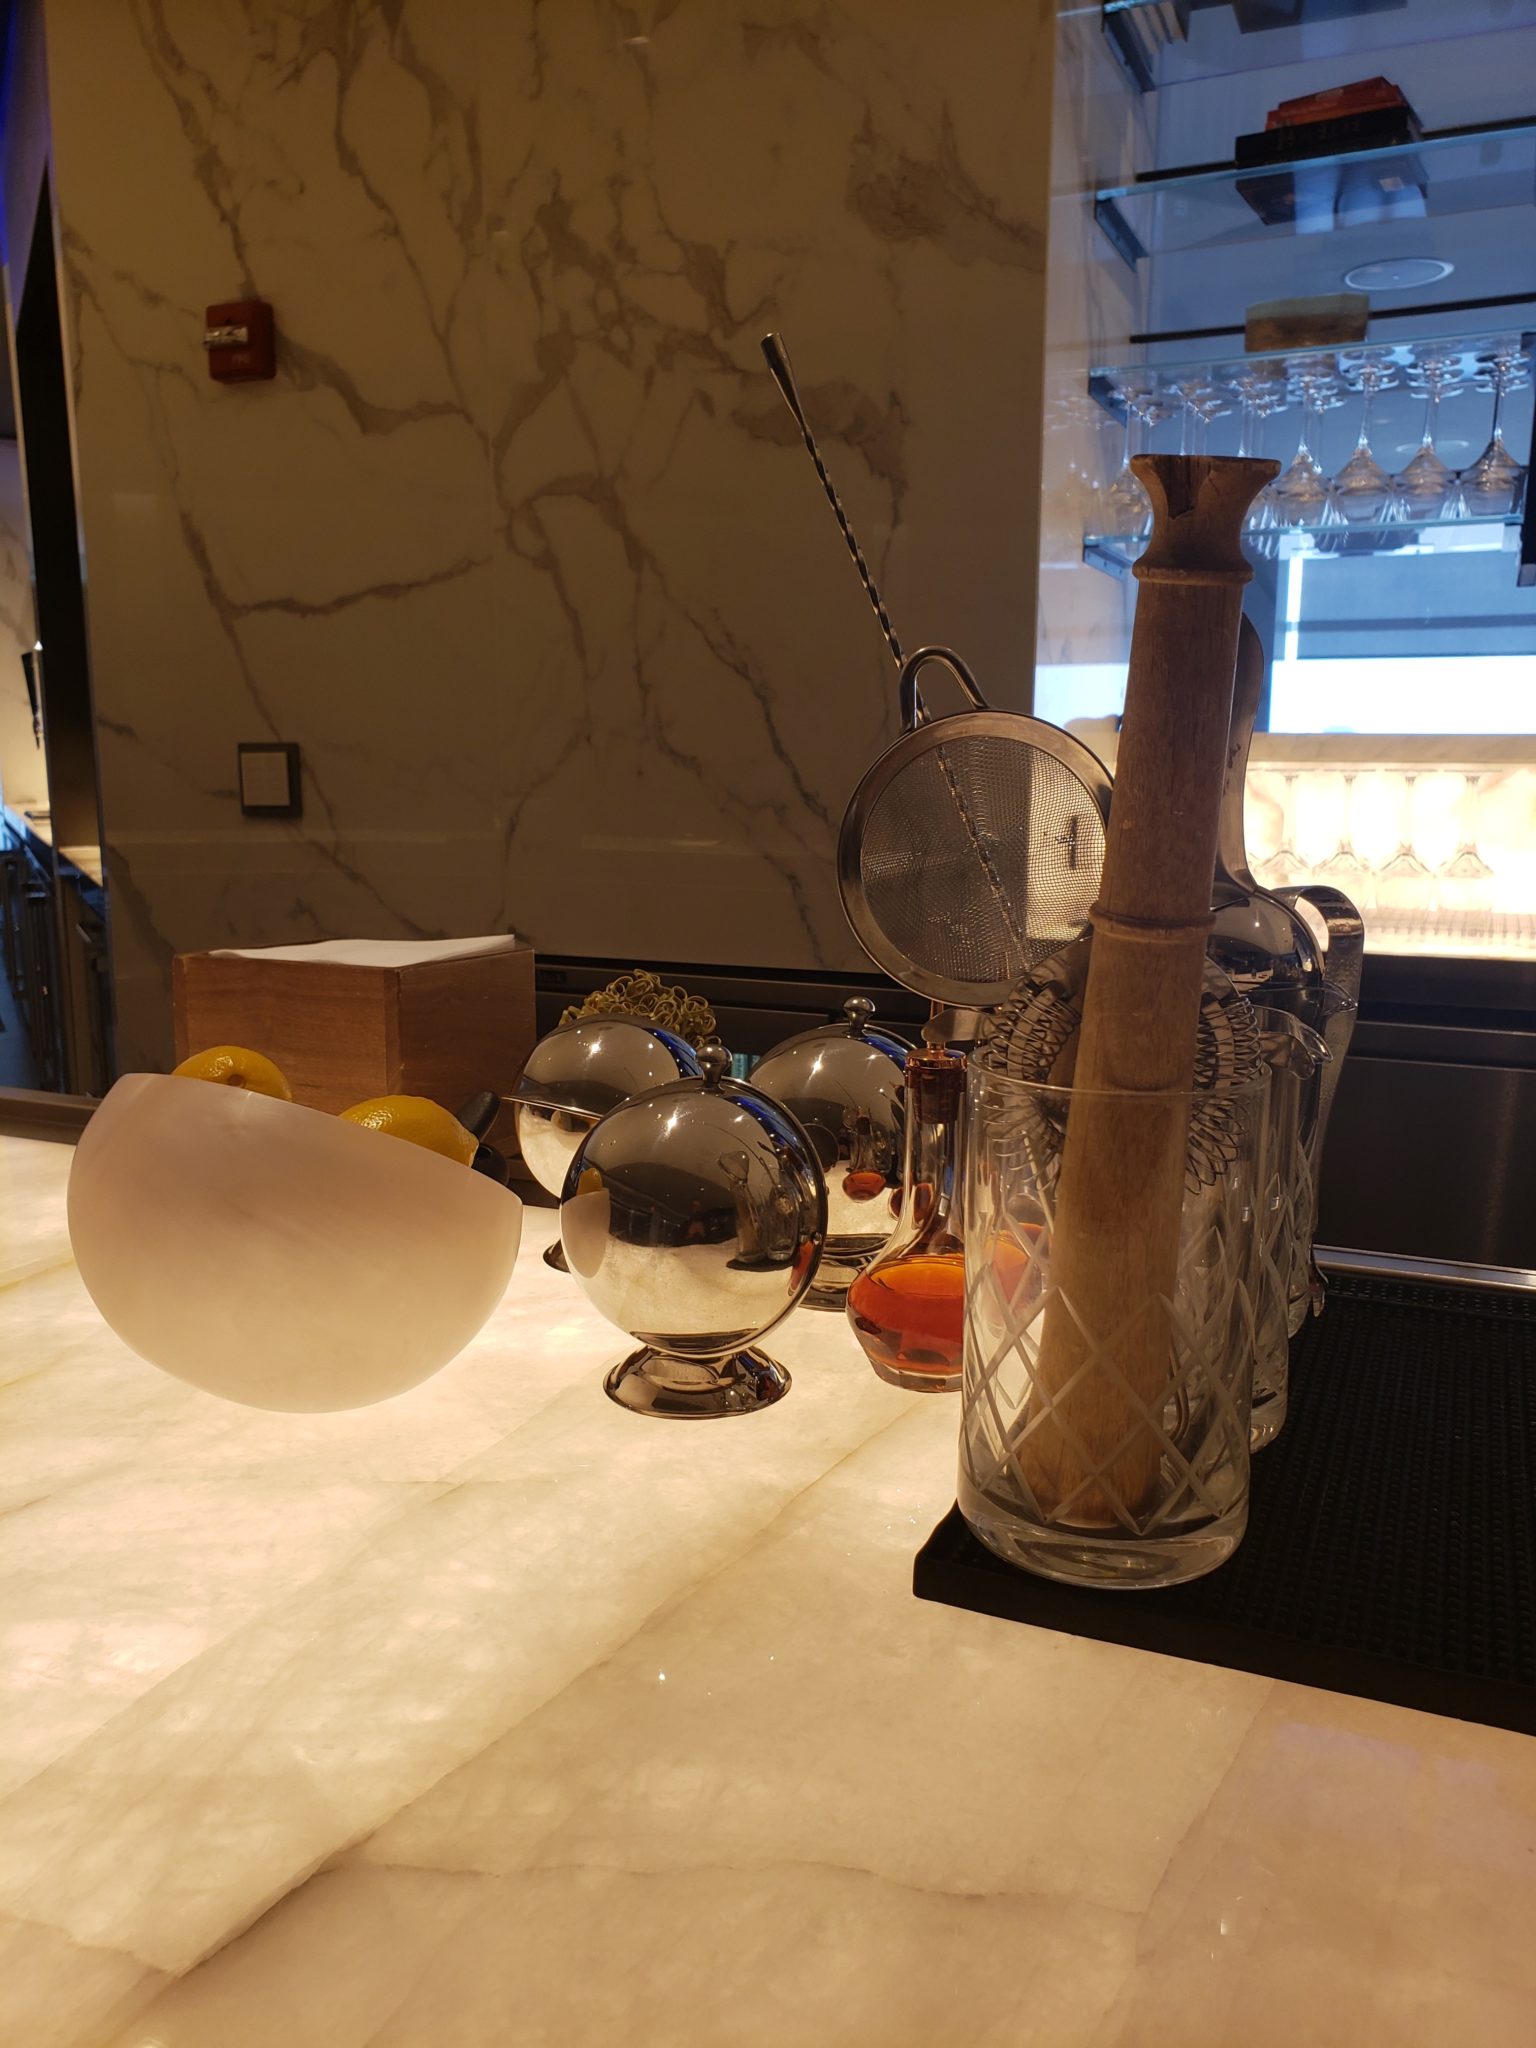 a bar counter with a glass and utensils